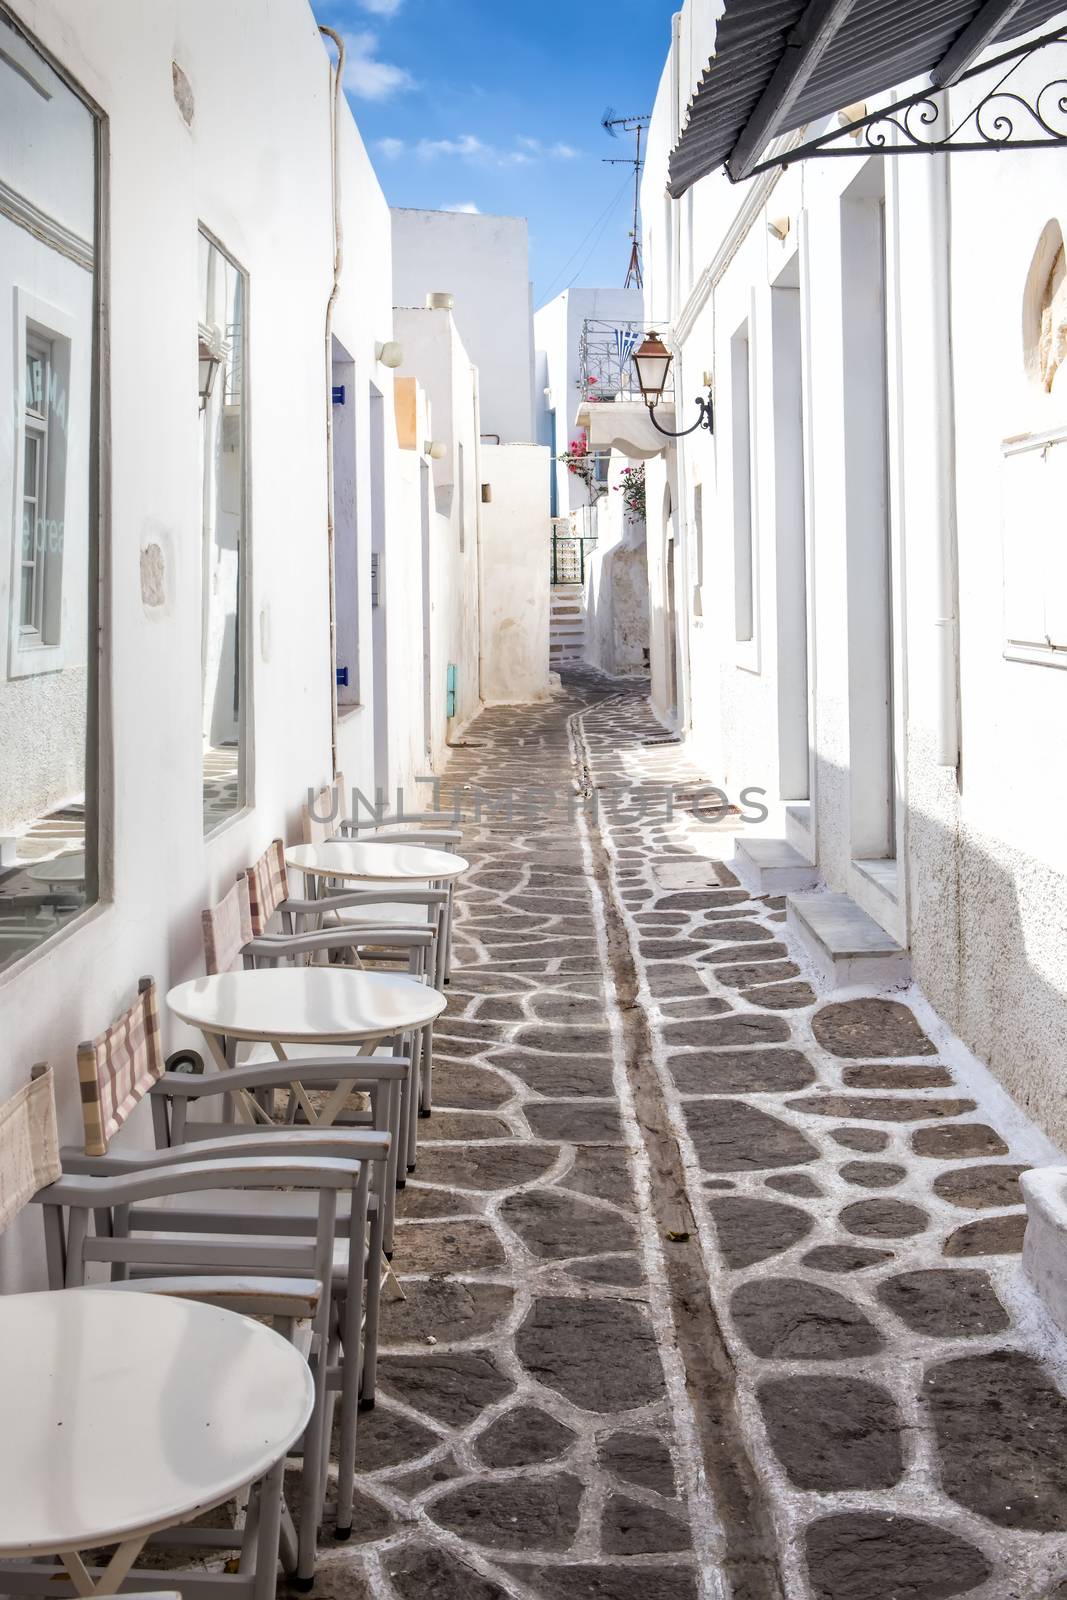 Narrow street with traditional white houses in Parikia, the capital of Paros. Parikia harbour is a major hub for Aegean islands ferries and catamarans.